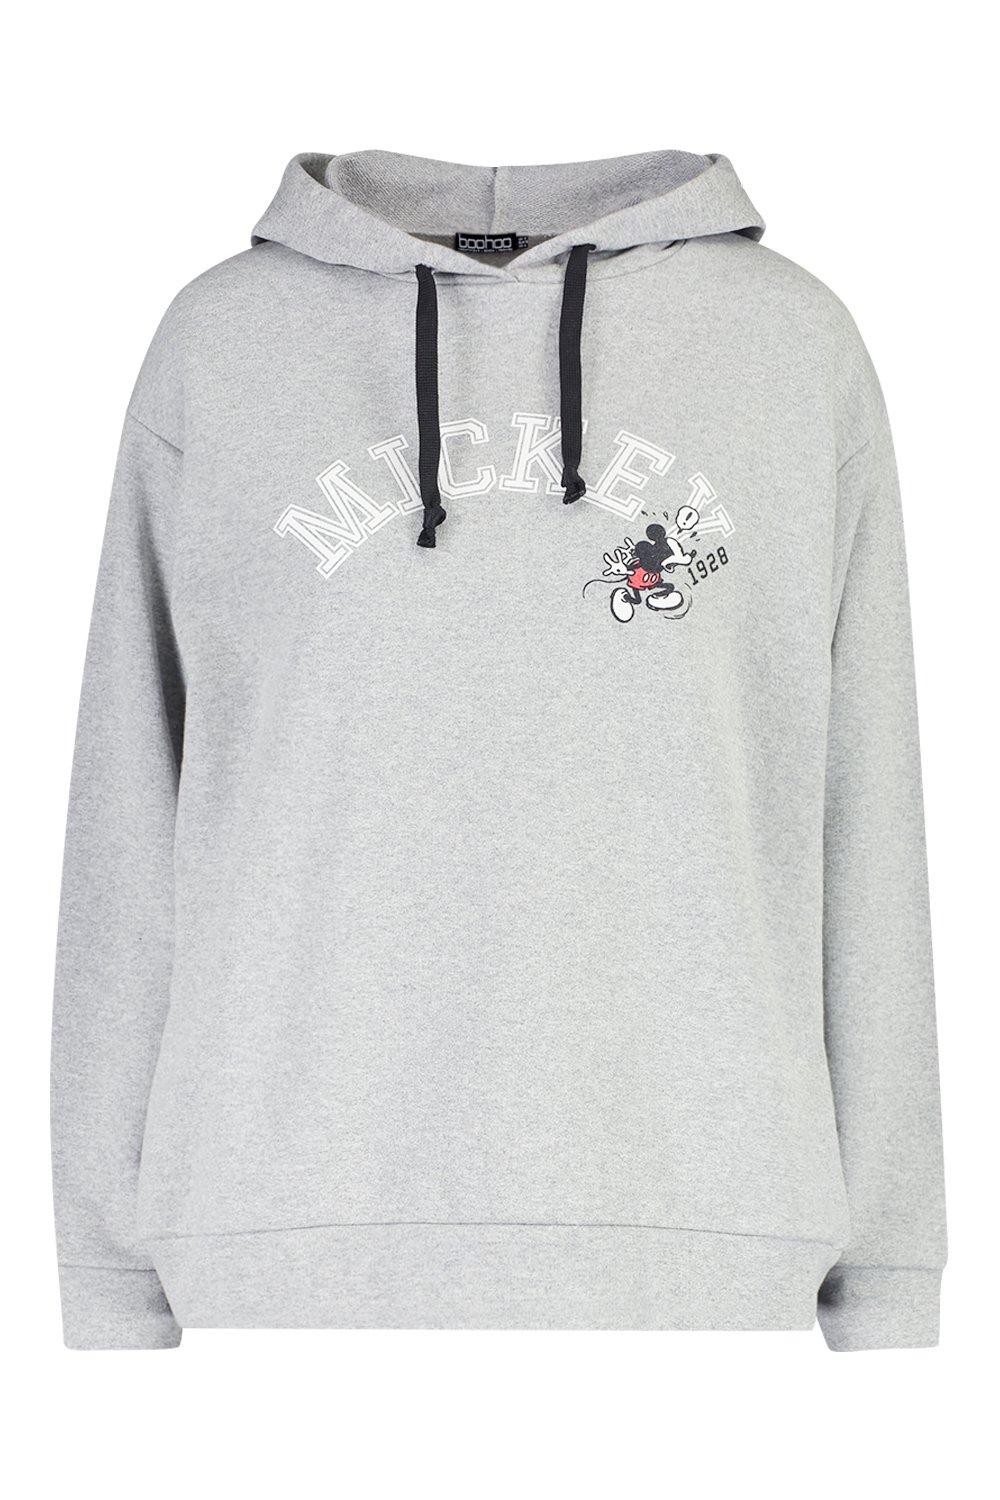 grey mickey mouse hoodie